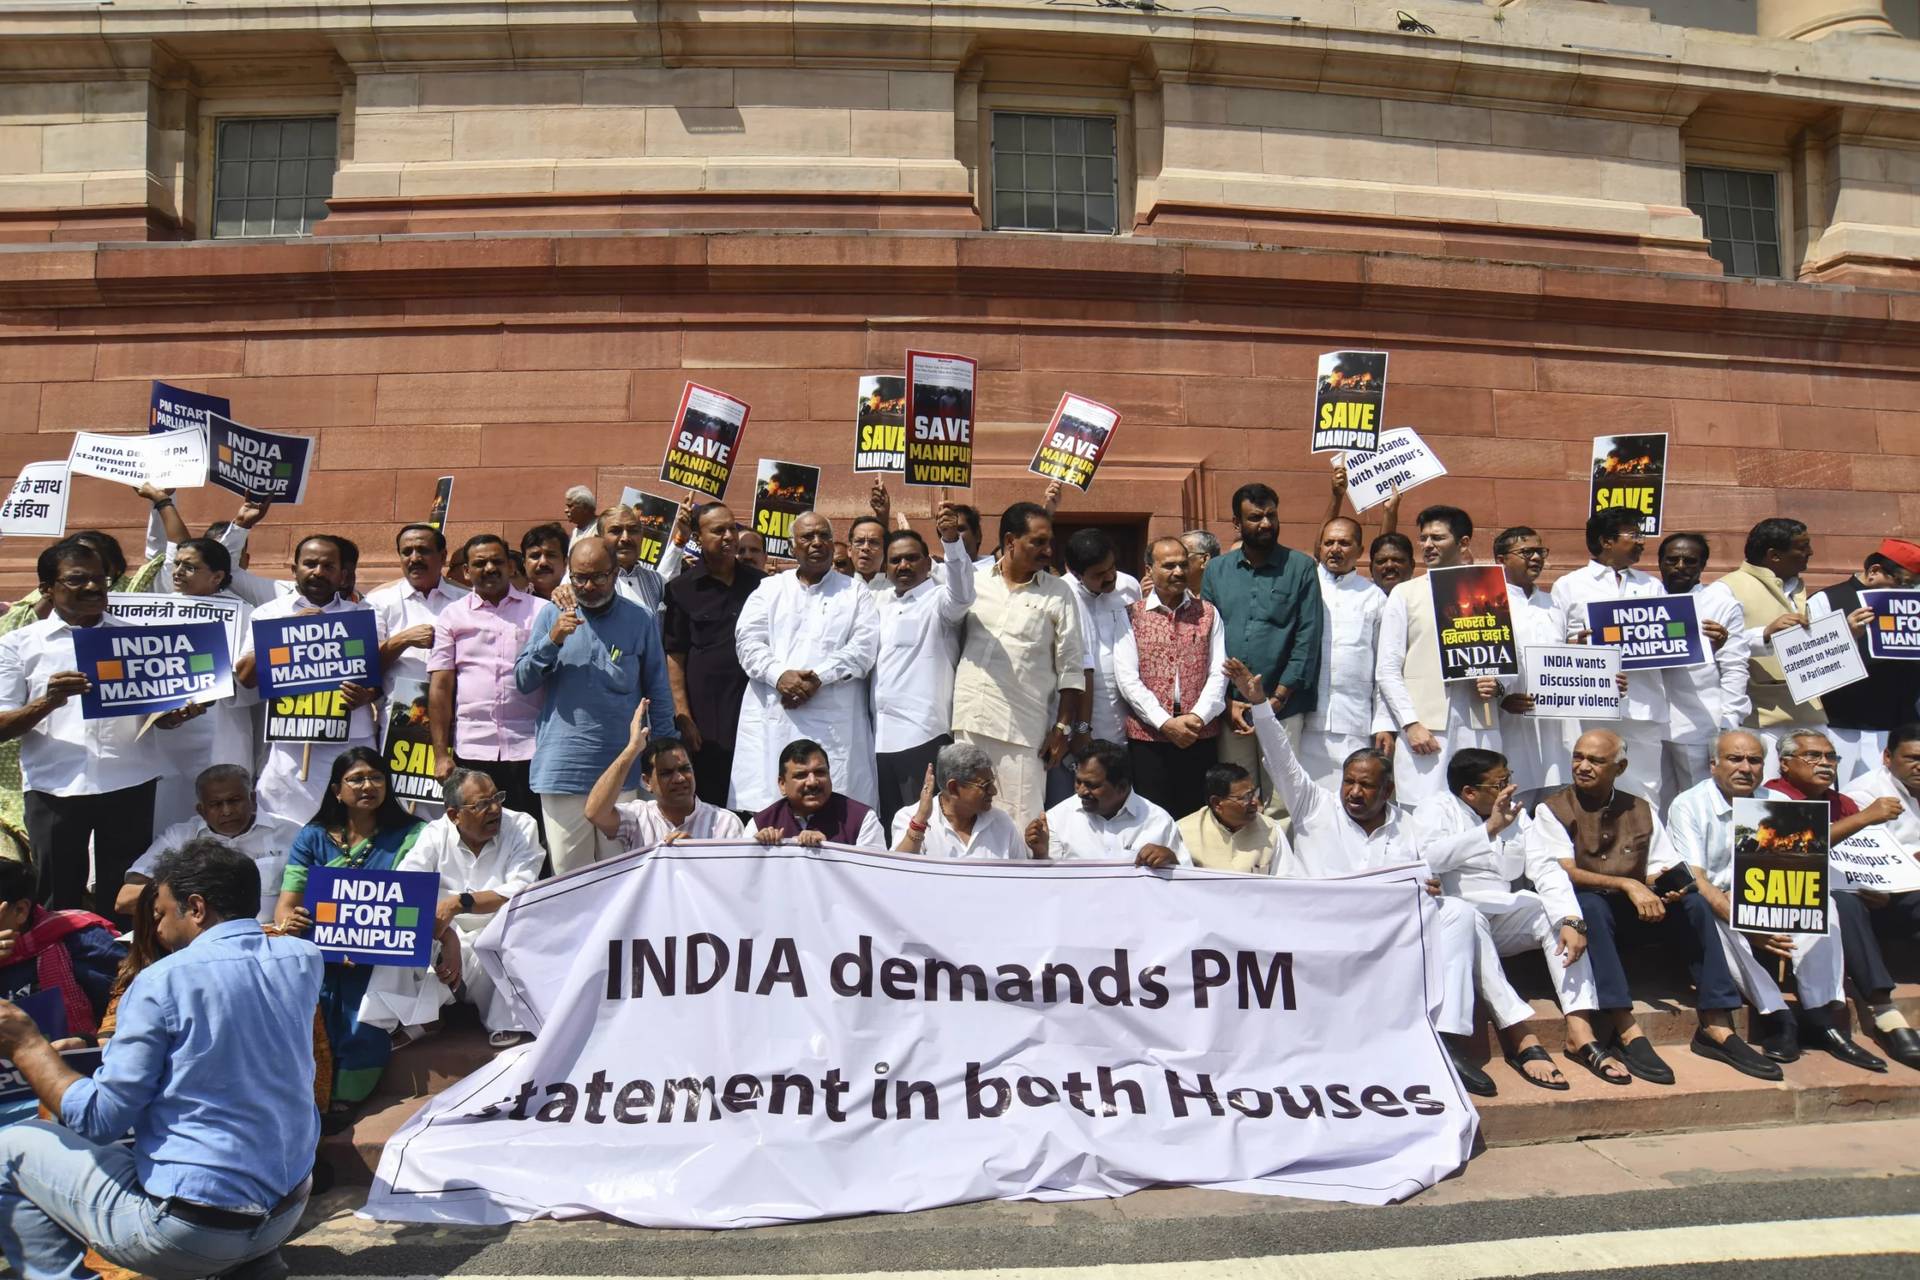 Opposition lawmakers demanding a statement from Prime Minister Narendra Modi on the violence in Manipur state carry placards and a banner with name of “INDIA” outside the Parliament building in New Delhi, India, July 24, 2023. (Credit: AP Photo.) 2 of 3 | FILE- Indian Prime Minister Narendra Modi arrives on the opening day of the monsoon session of the Indian parliament in New Delhi, India, July 20, 2023. For three months, the strongman leader has been largely silent on ethnic violence that has killed over 150 people in Manipur, a remote state in India’s northeast. That’s sparked a no-confidence motion against his government in Parliament, where his party and allies hold a clear majority. (AP Photo/Manish Swarup, File) Read More 3 of 3 | FILE- Indian opposition leader Rahul Gandhi addresses a press conference after he was expelled from parliament after a court convicted him of defamation and sentenced him to two years in prison for mocking the surname Modi in an election speech, in New Delhi, India, March 25, 2023. India’s Parliament on Monday, Aug. 7, 2023 reinstated top opposition leader Rahul Gandhi as a lawmaker three days after the country’s top court halted his criminal defamation conviction for mocking the prime minister’s surname. (AP Photo/Altaf Qadri, File) Read More